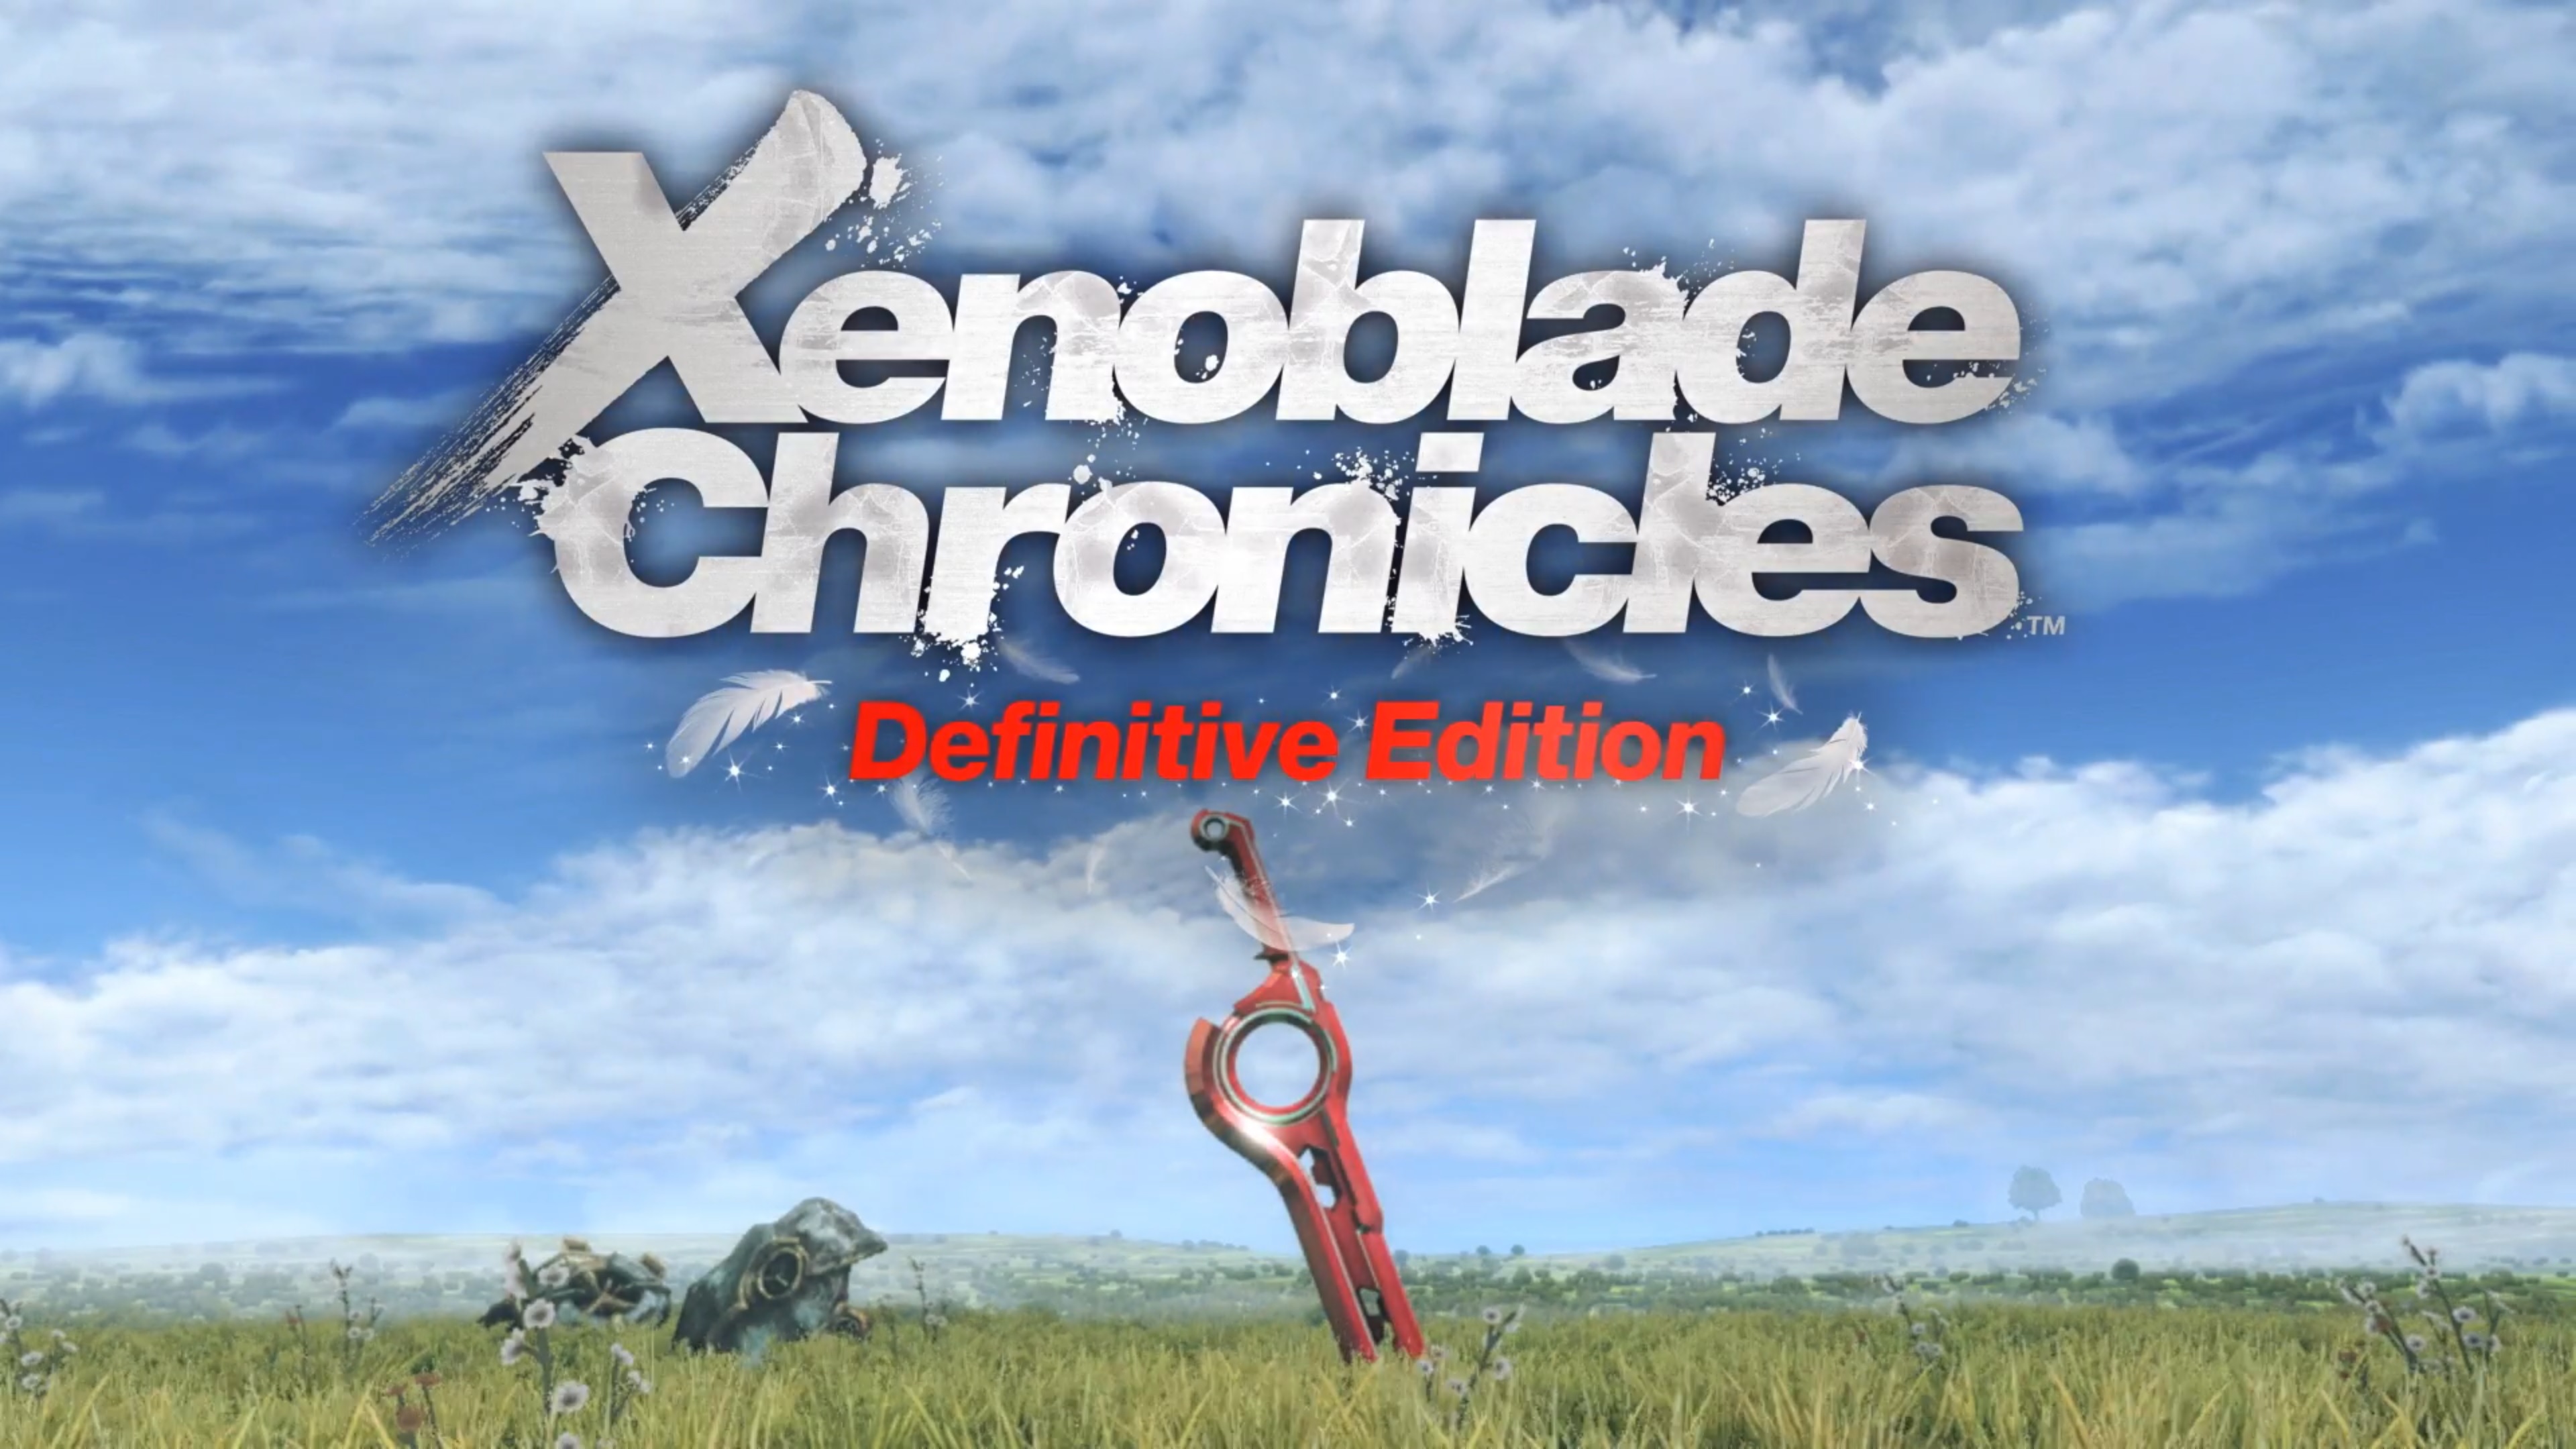 Xenoblade Chronicles Definitive Edition announced for Switch